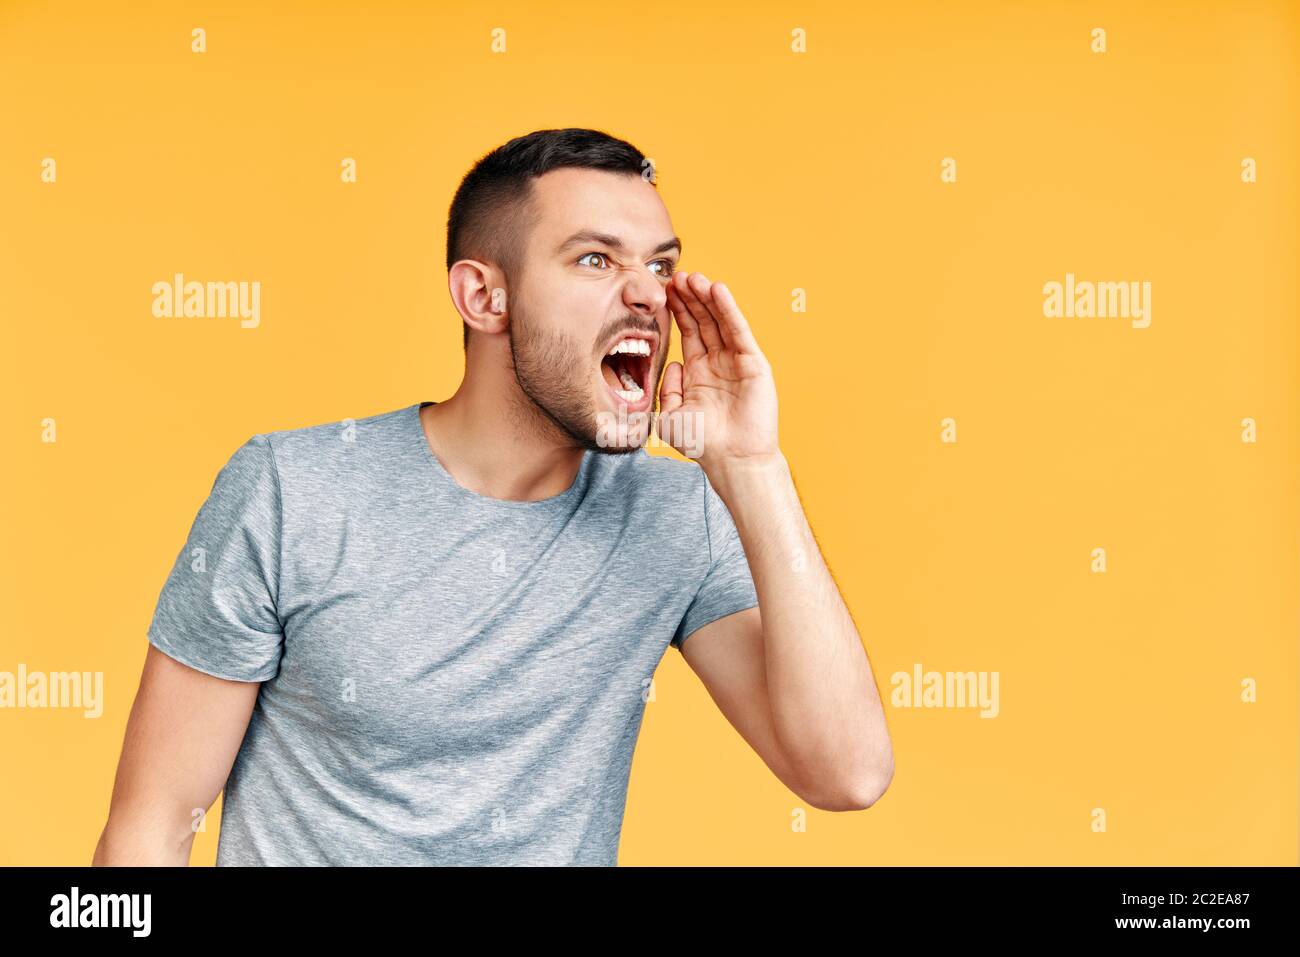 Young angry man shouting and screaming loud to side with hand on mouth and copy space for text over yellow background Stock Photo